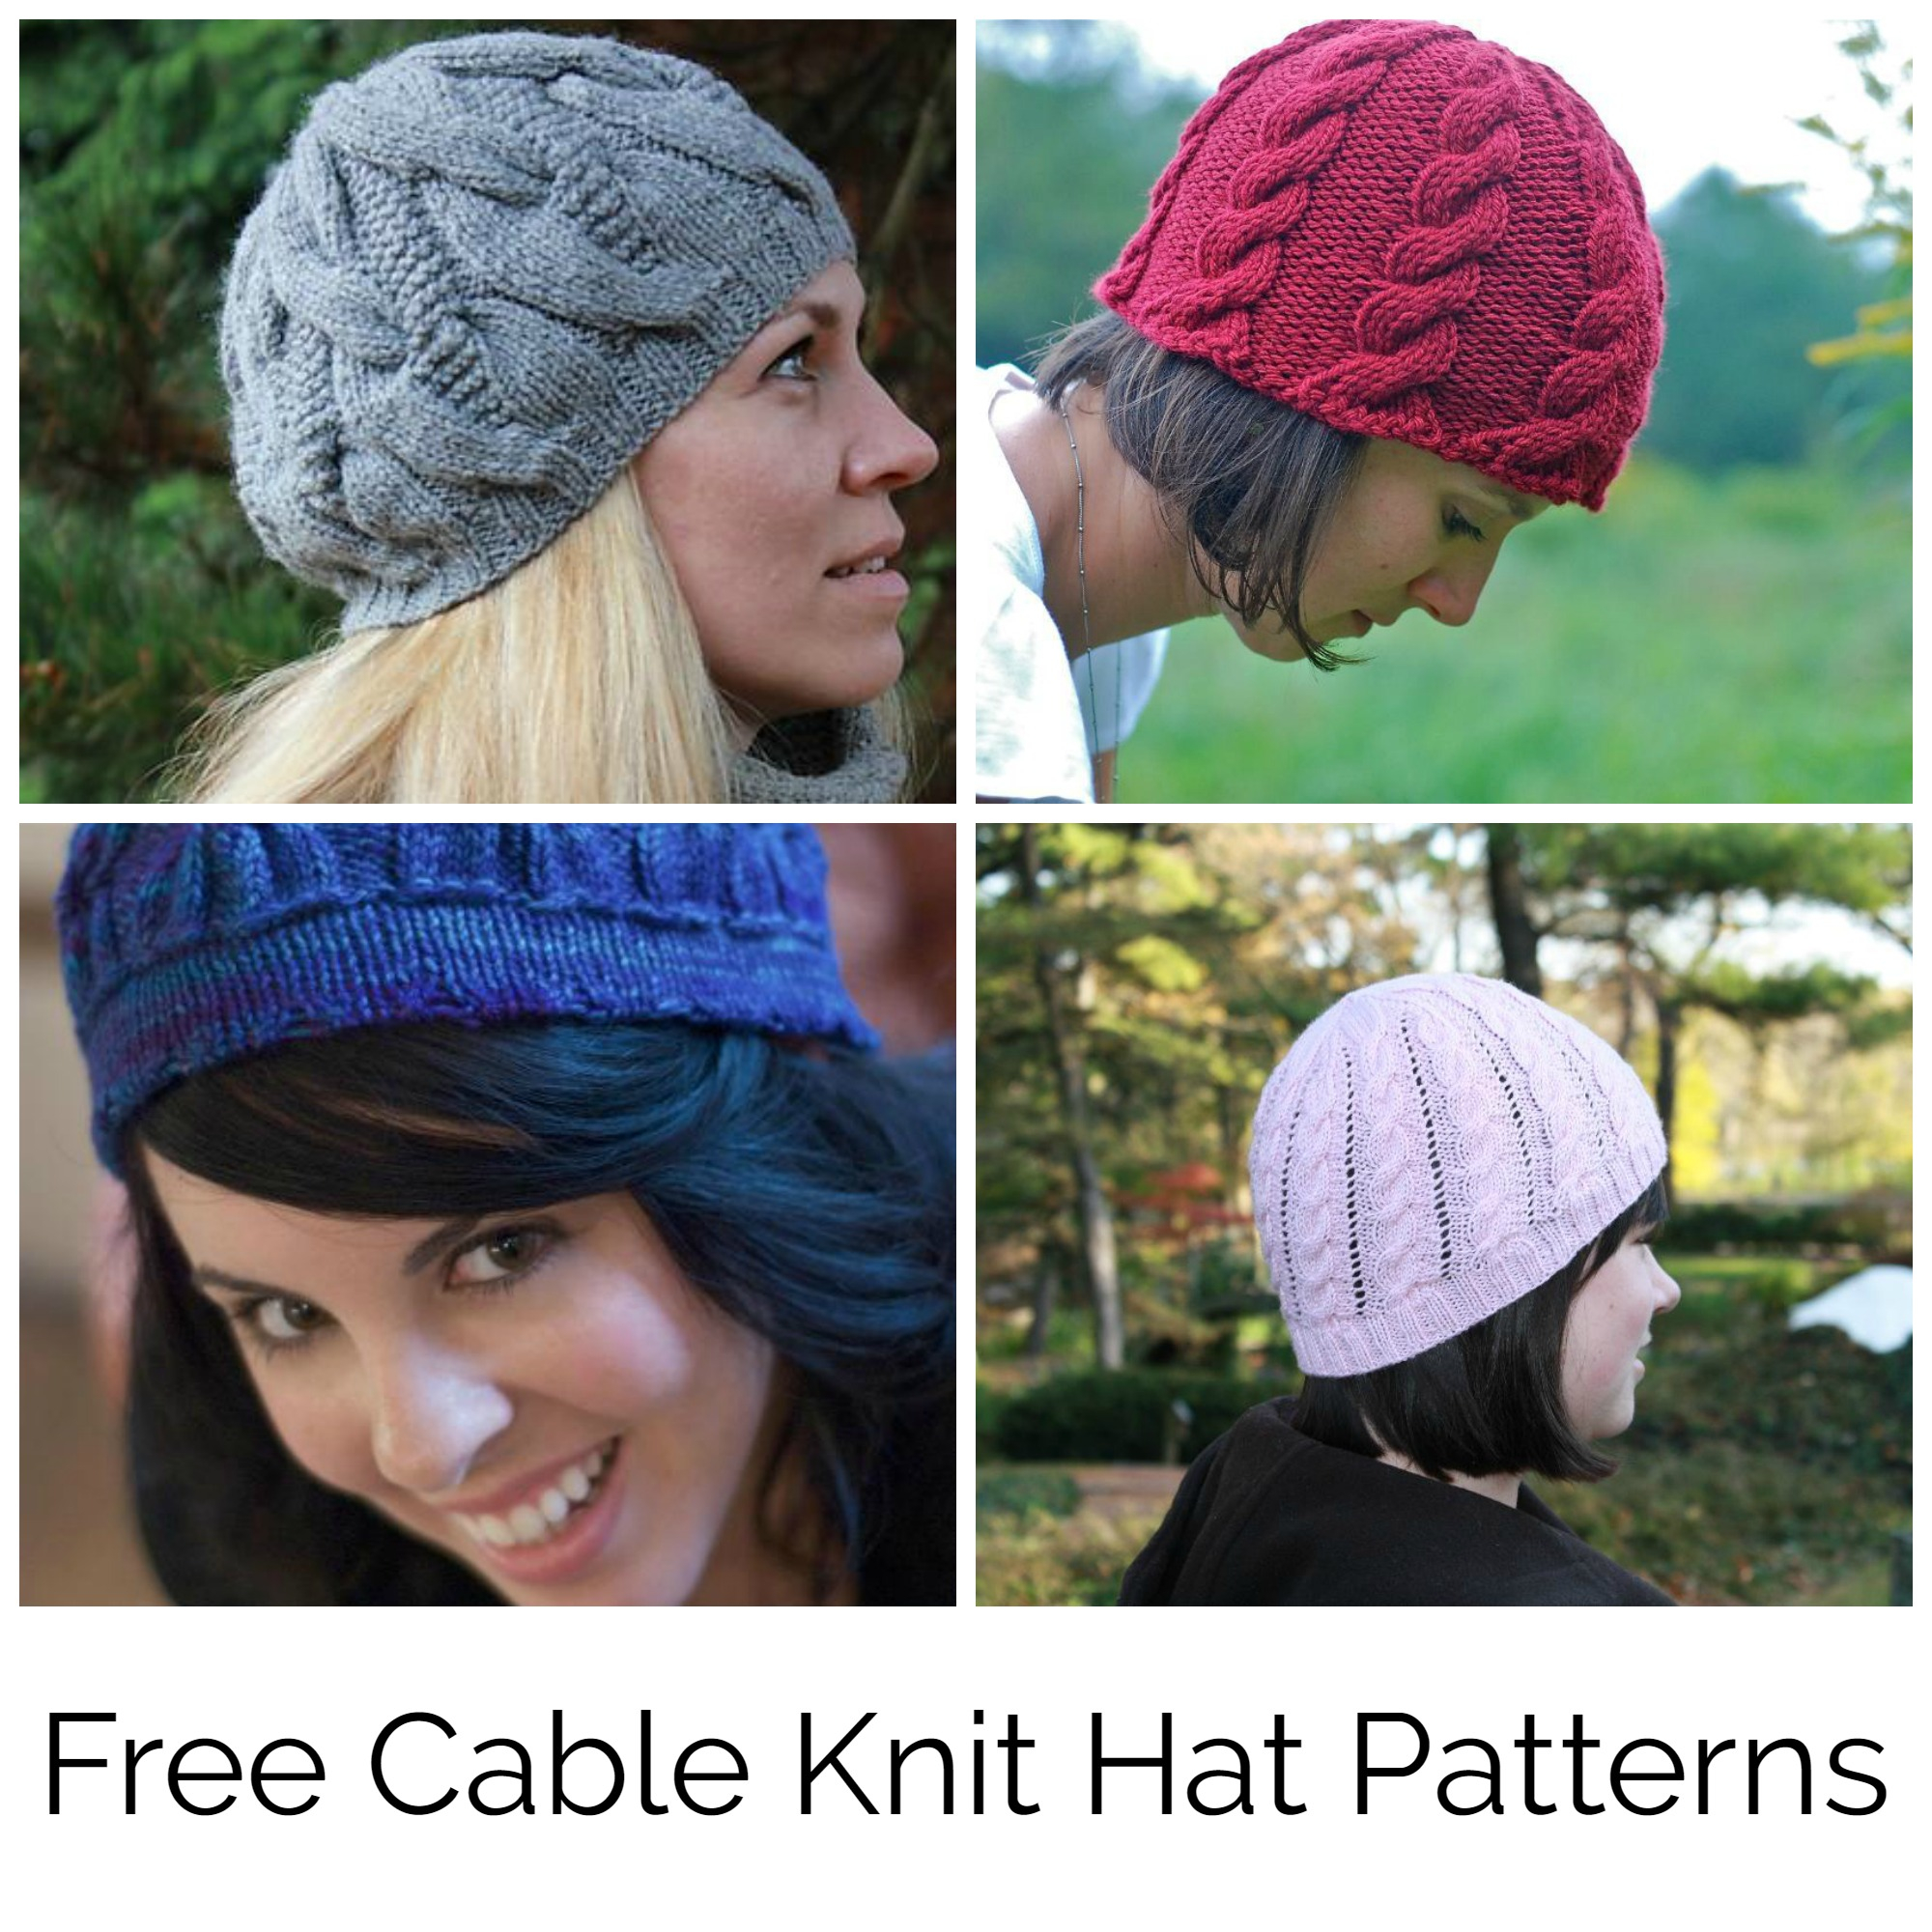 Knitted Hats Patterns Find Your Favorite Free Cable Knit Hat Pattern